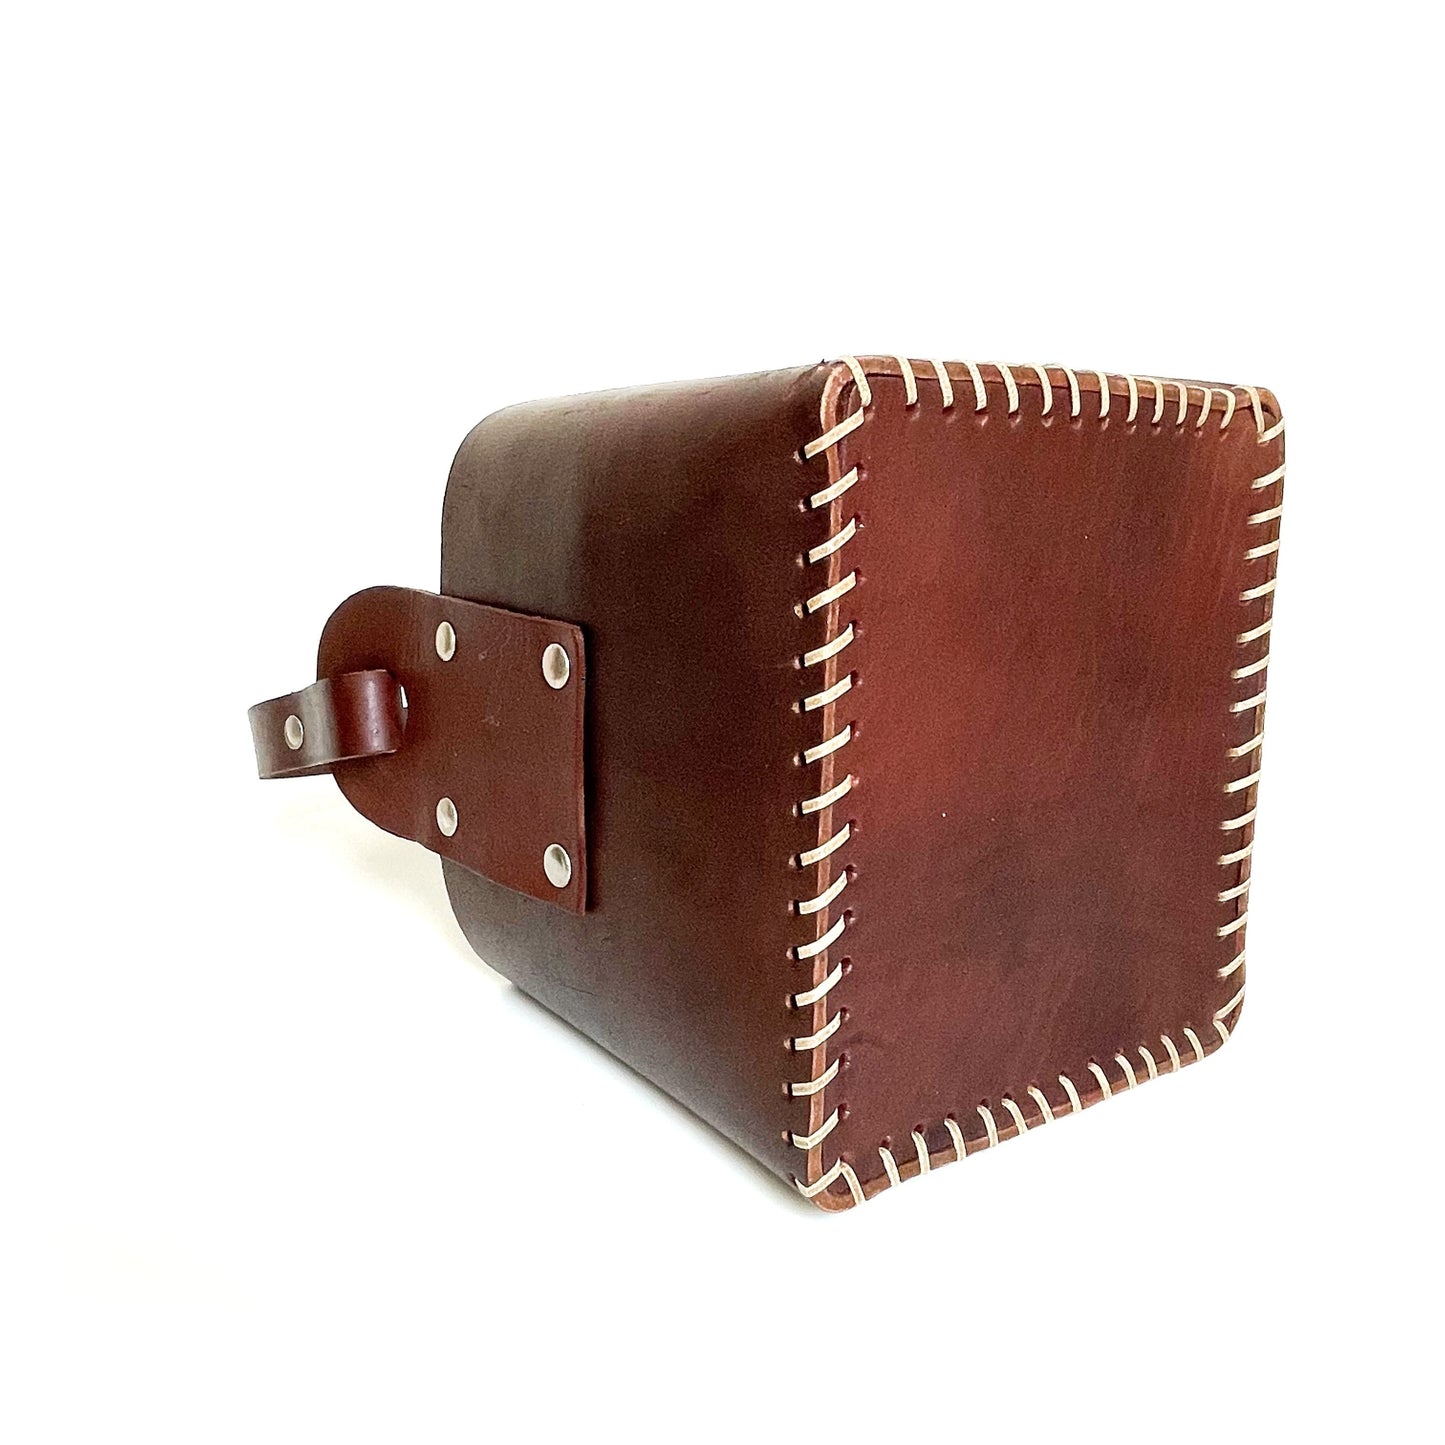 Rigid material in smooth brown leather 